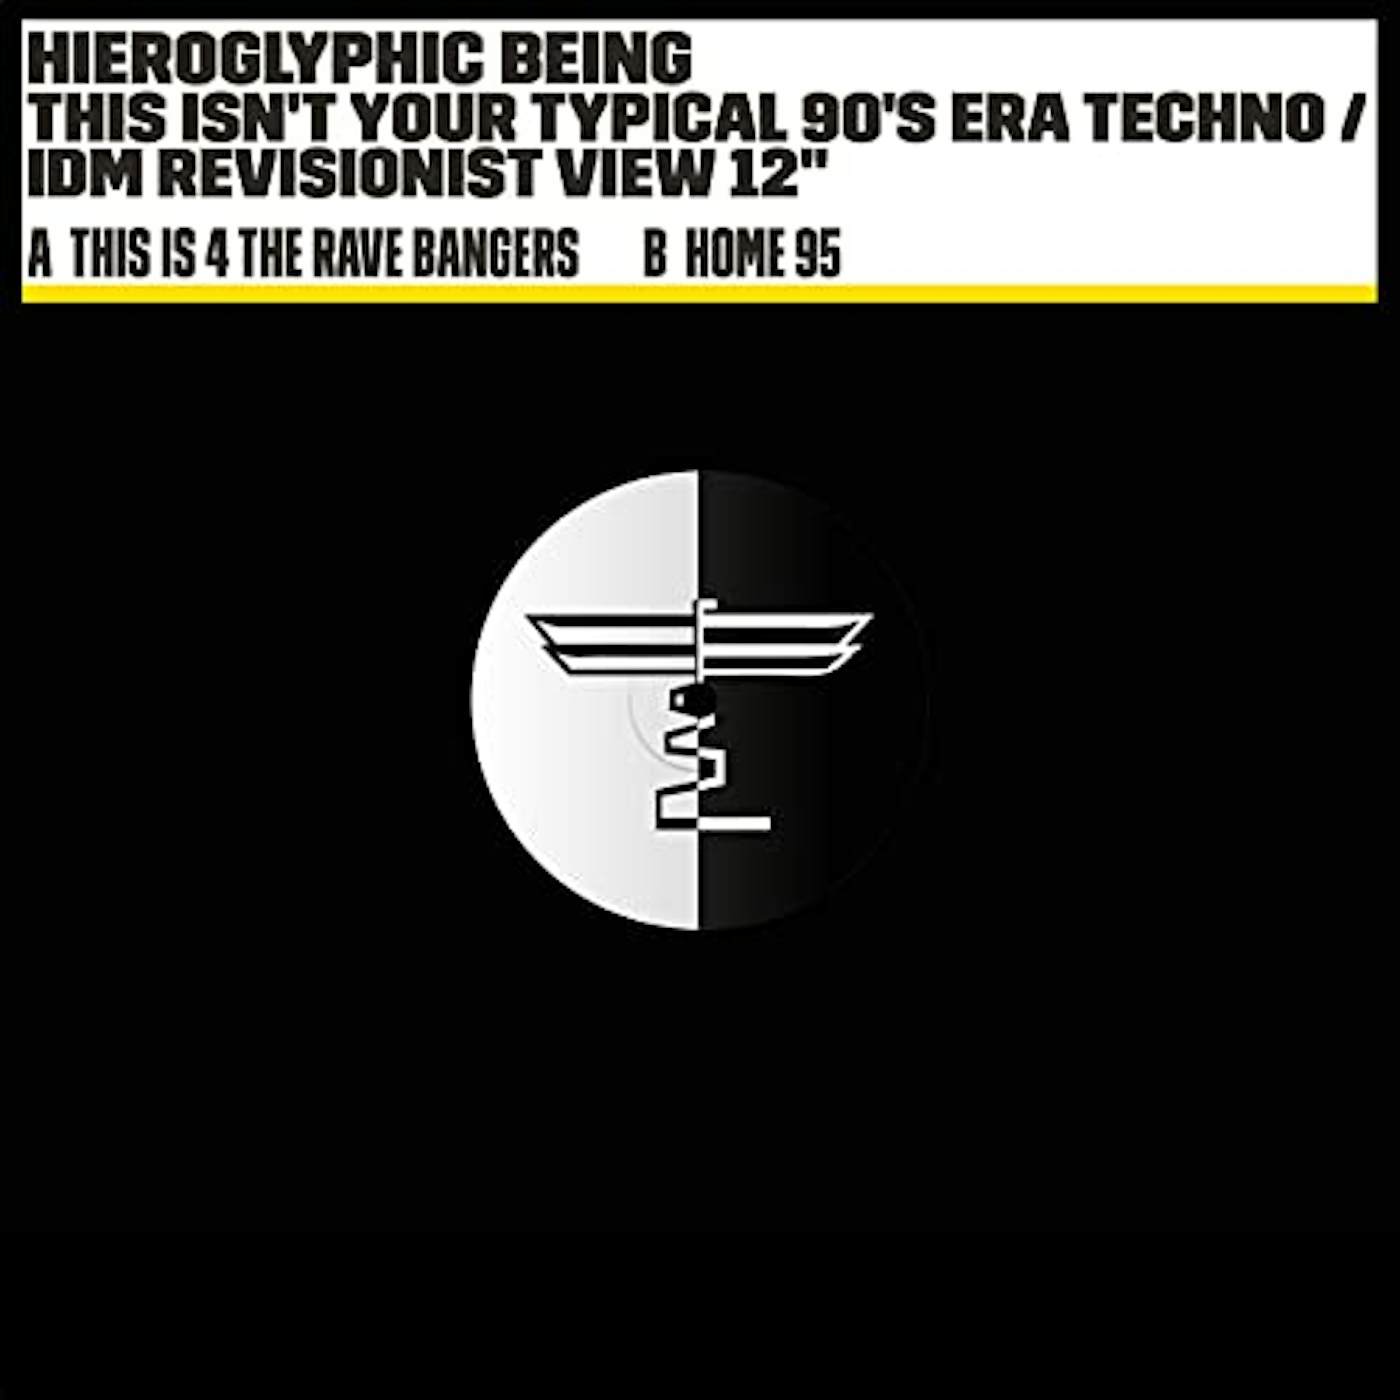 Hieroglyphic Being This Isn't Your Typical 90's Era Techno Vinyl Record